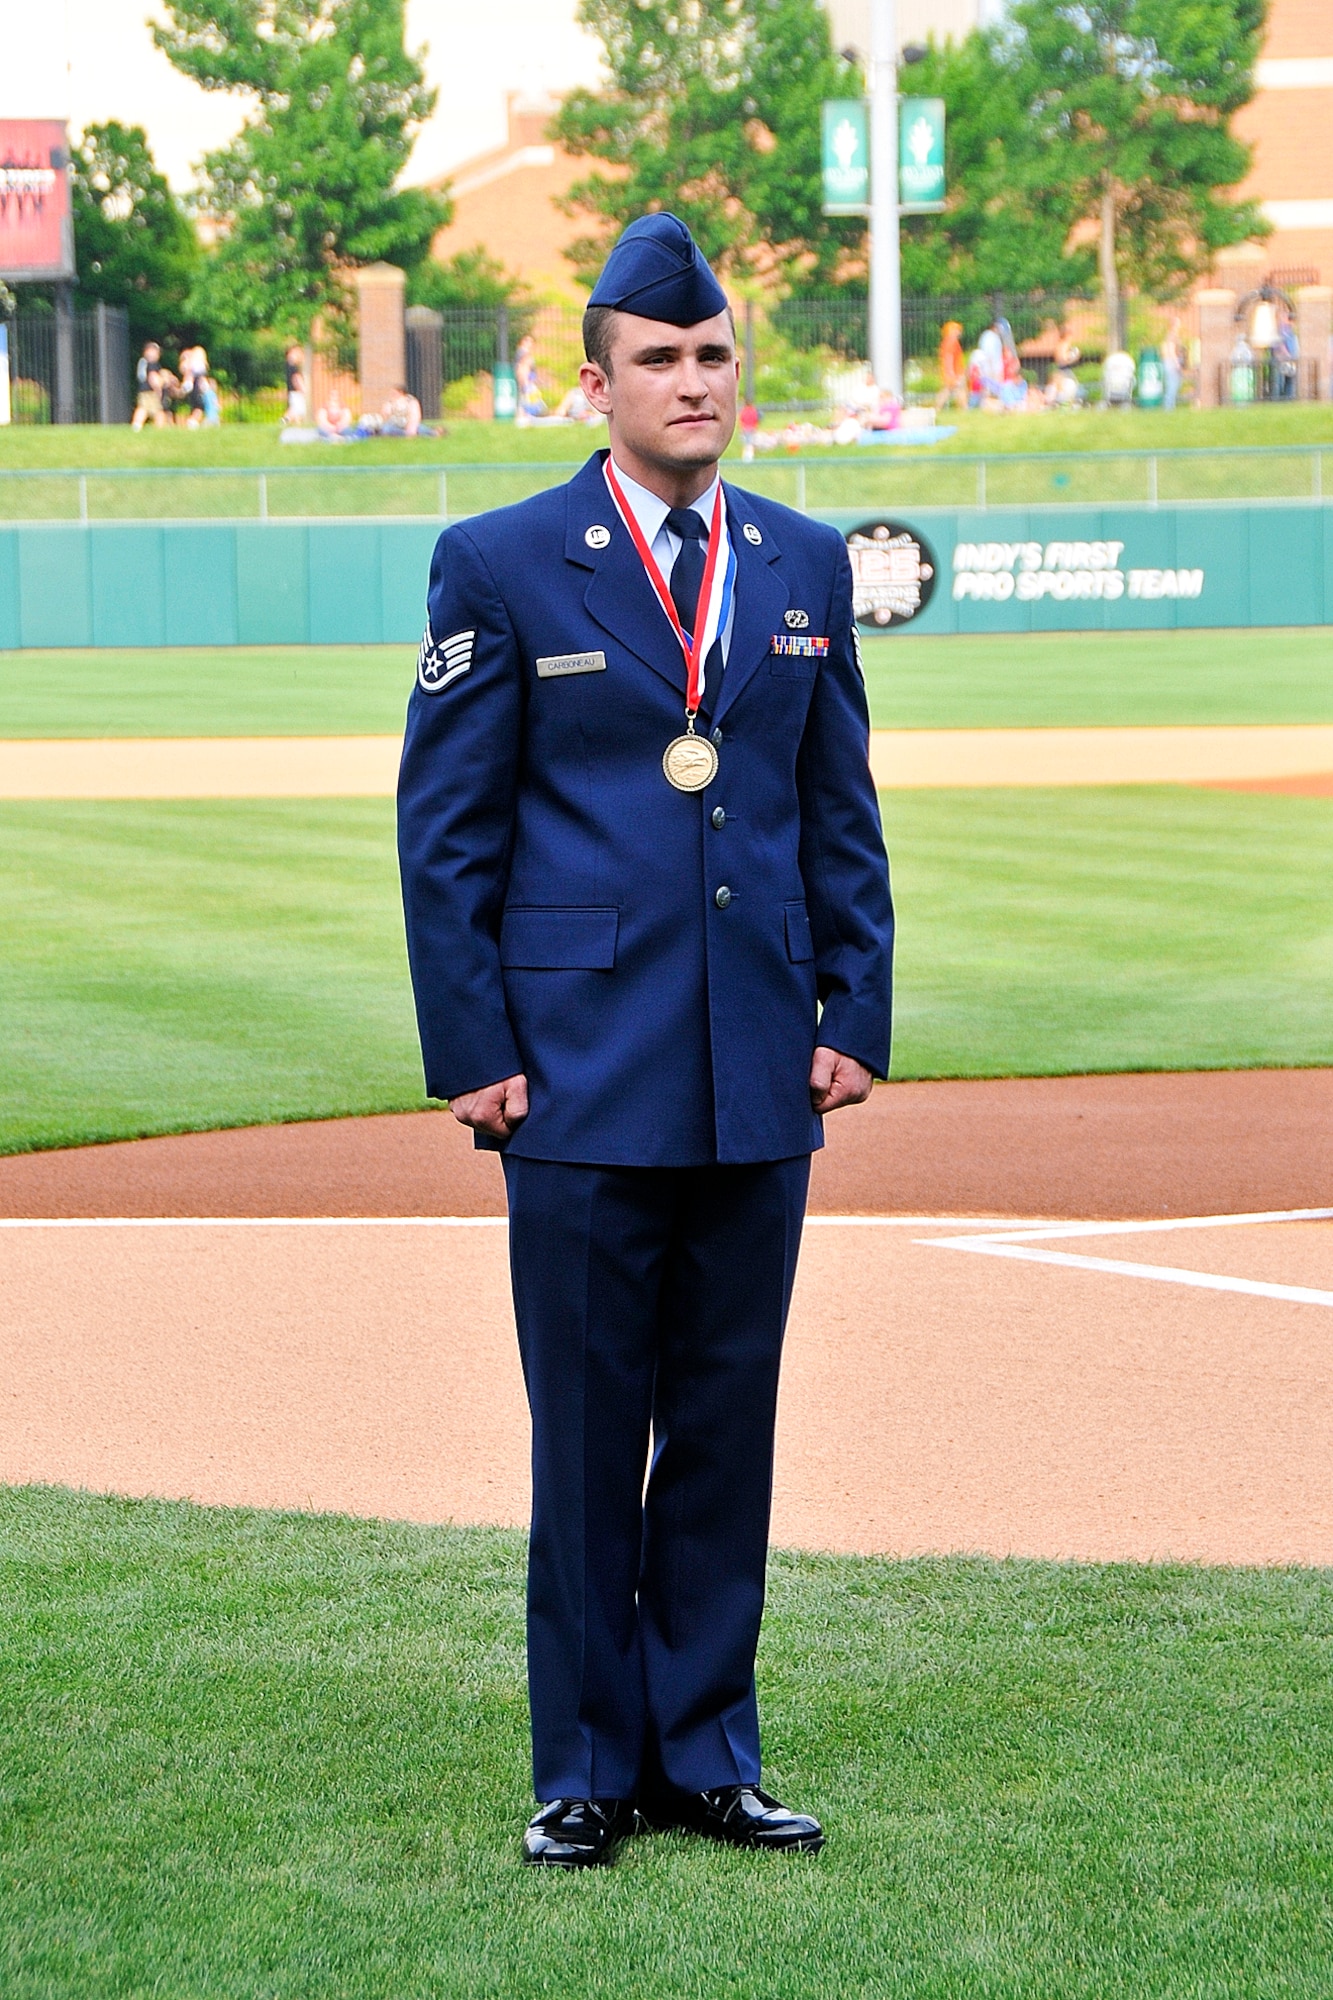 Indiana Air National Guard Staff Sgt. Andrew Carboneau stands on Victory Field, home of the Indianapolis Indians, in Indianapolis, Ind. on May 20, 2011.  Carboneau was just awarded Airman of the Year for 2010 for the Indiana Air National Guard and was being presented the award at the Armed Forces Day Picnic.  Photo by Indiana Air National Guard Staff Sgt. Justin Goeden. RELEASED